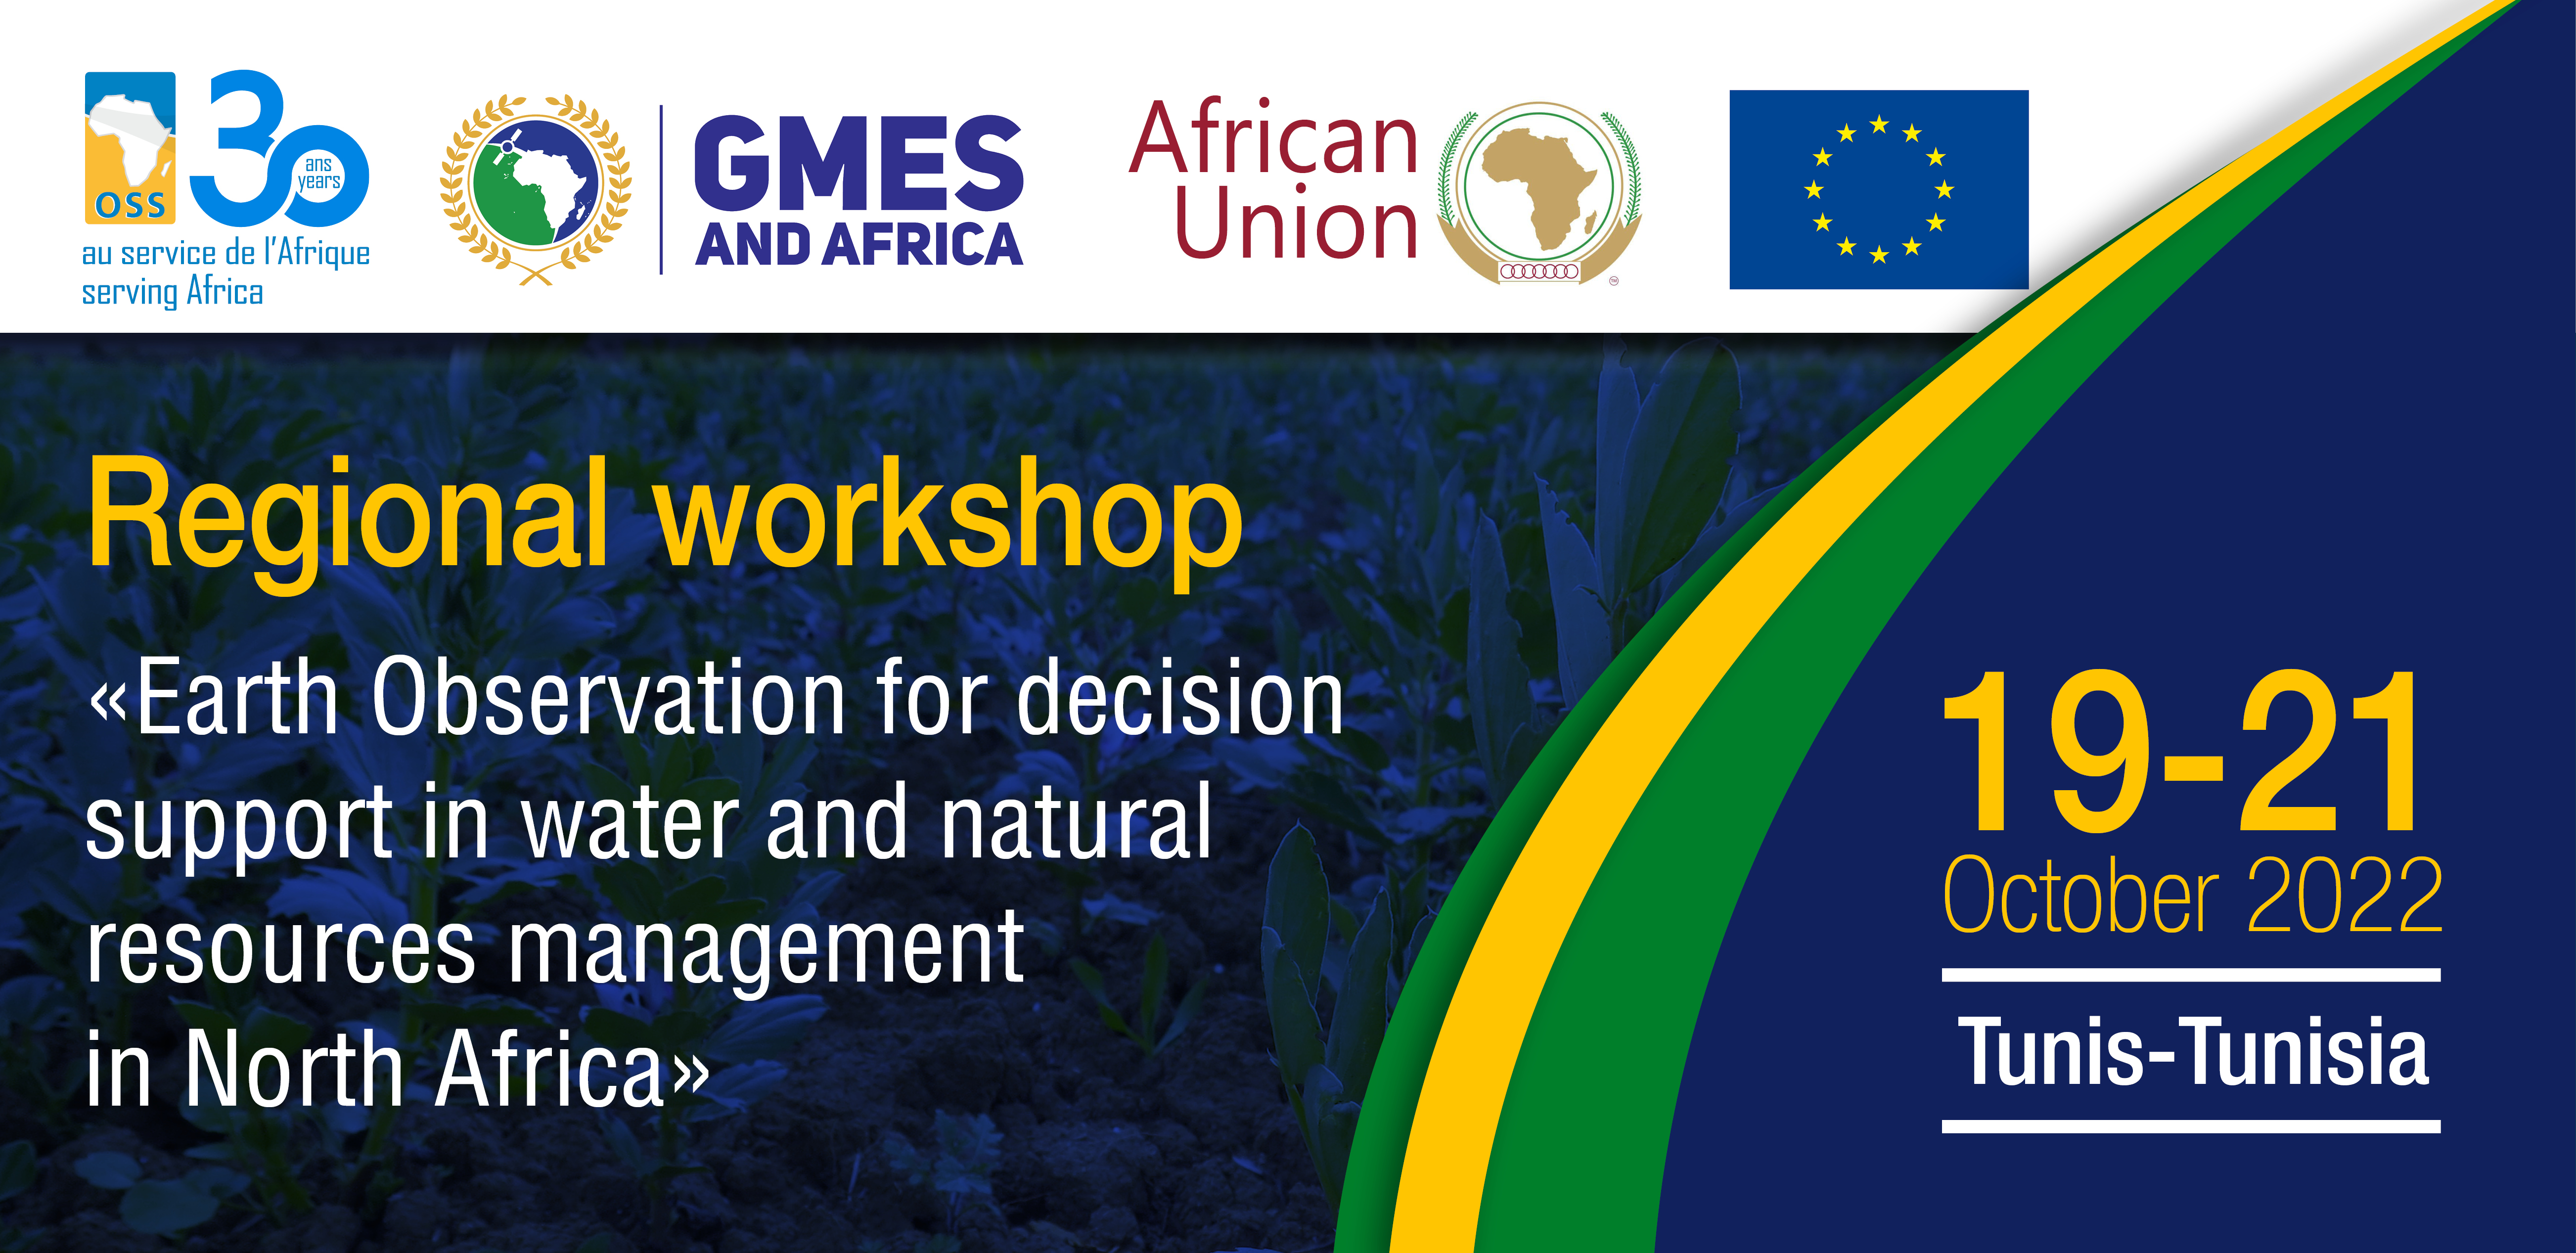  Regional Workshop Earth Observation for decision support in water and natural resources management in North Africa. October 19-21 2022, Tunis-Tunisia